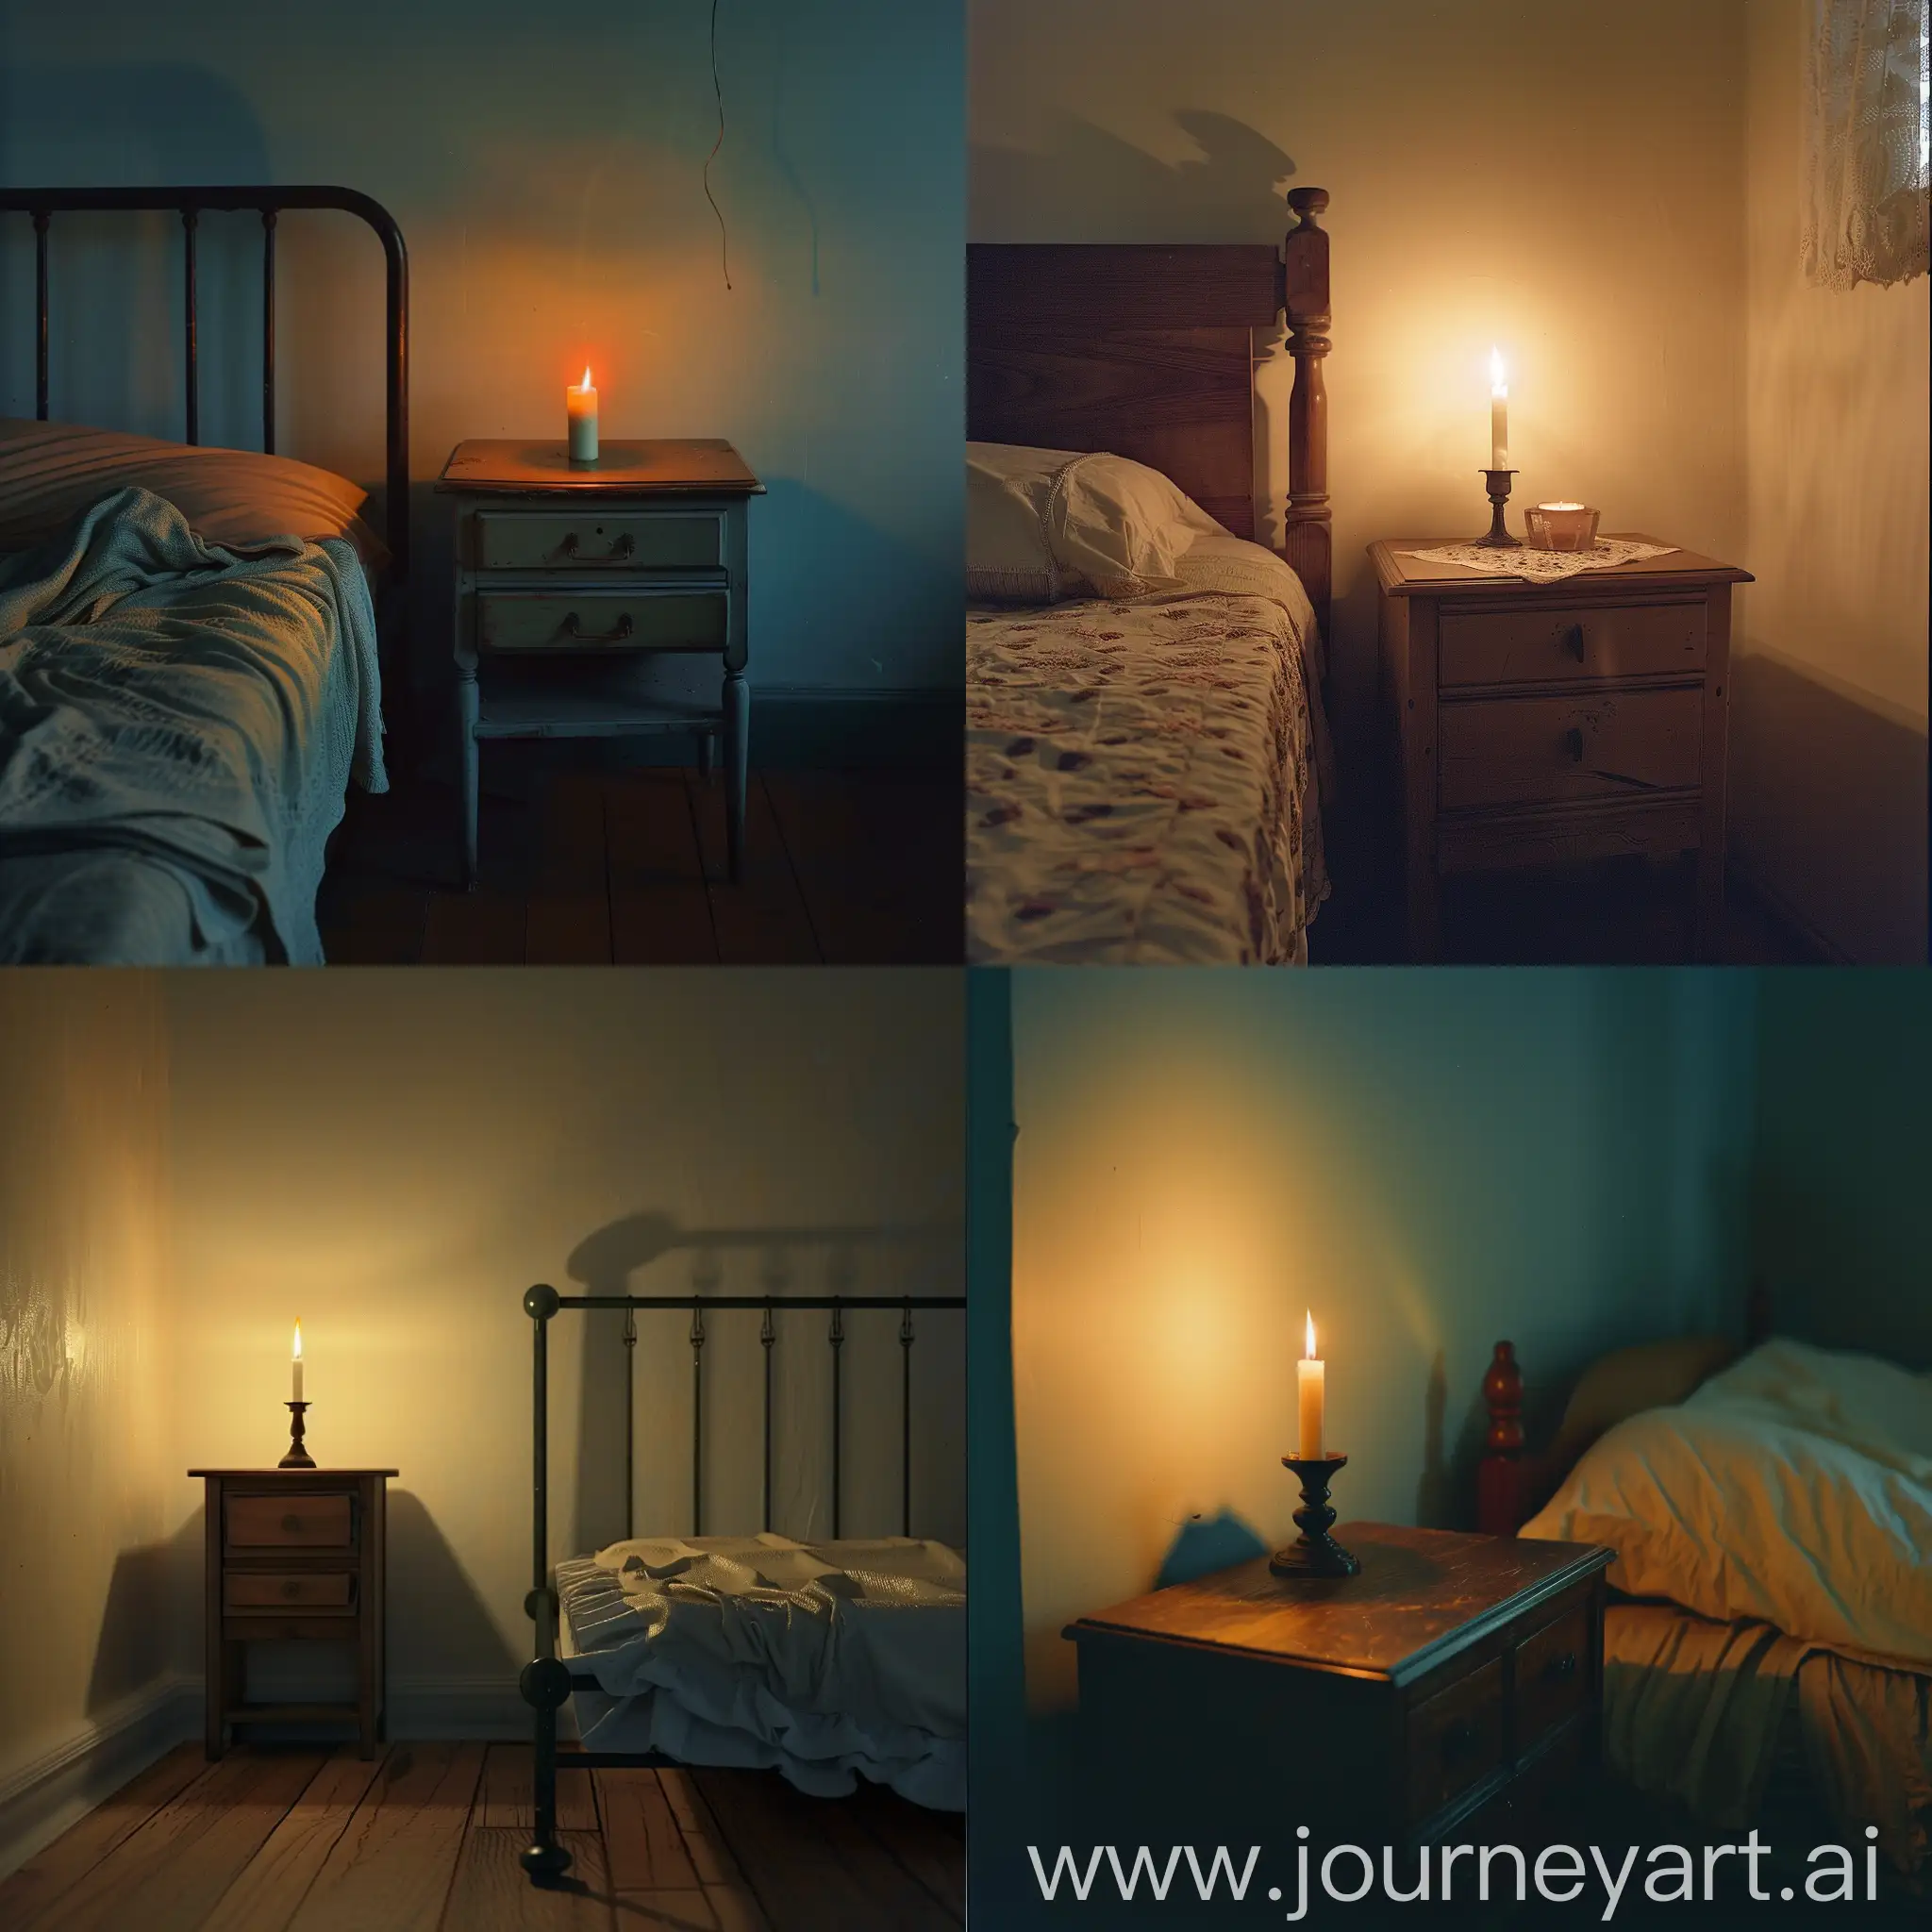 Lonely-Empty-Bed-in-Candlelit-Room